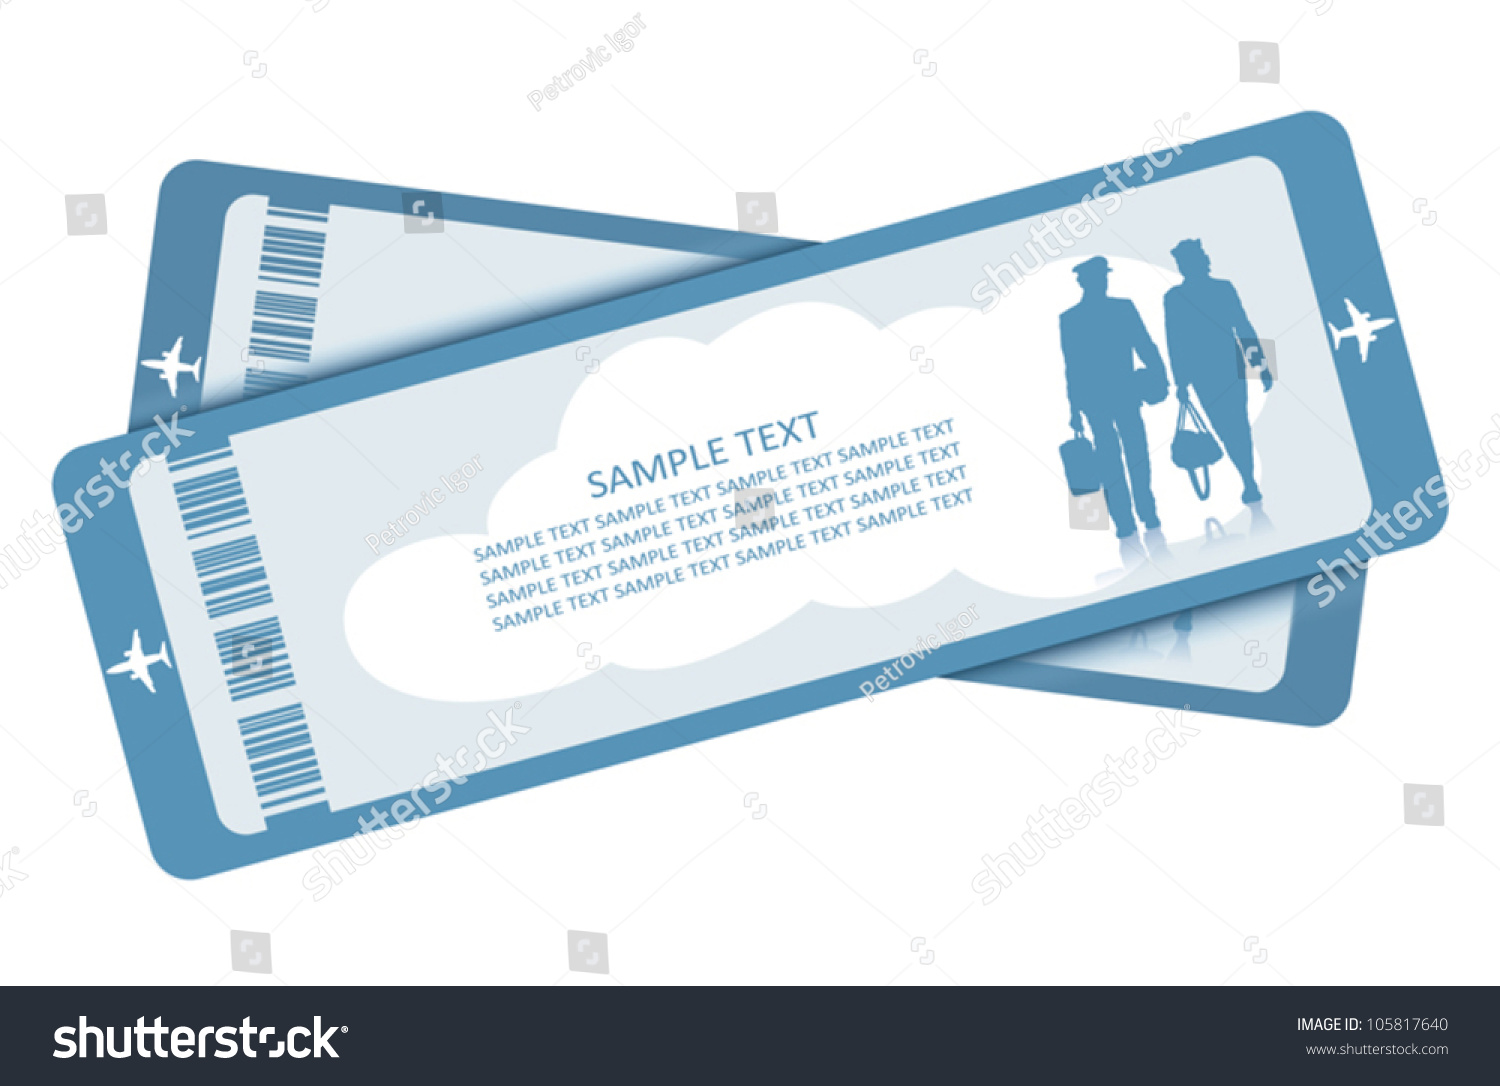 free clip art airline ticket - photo #25